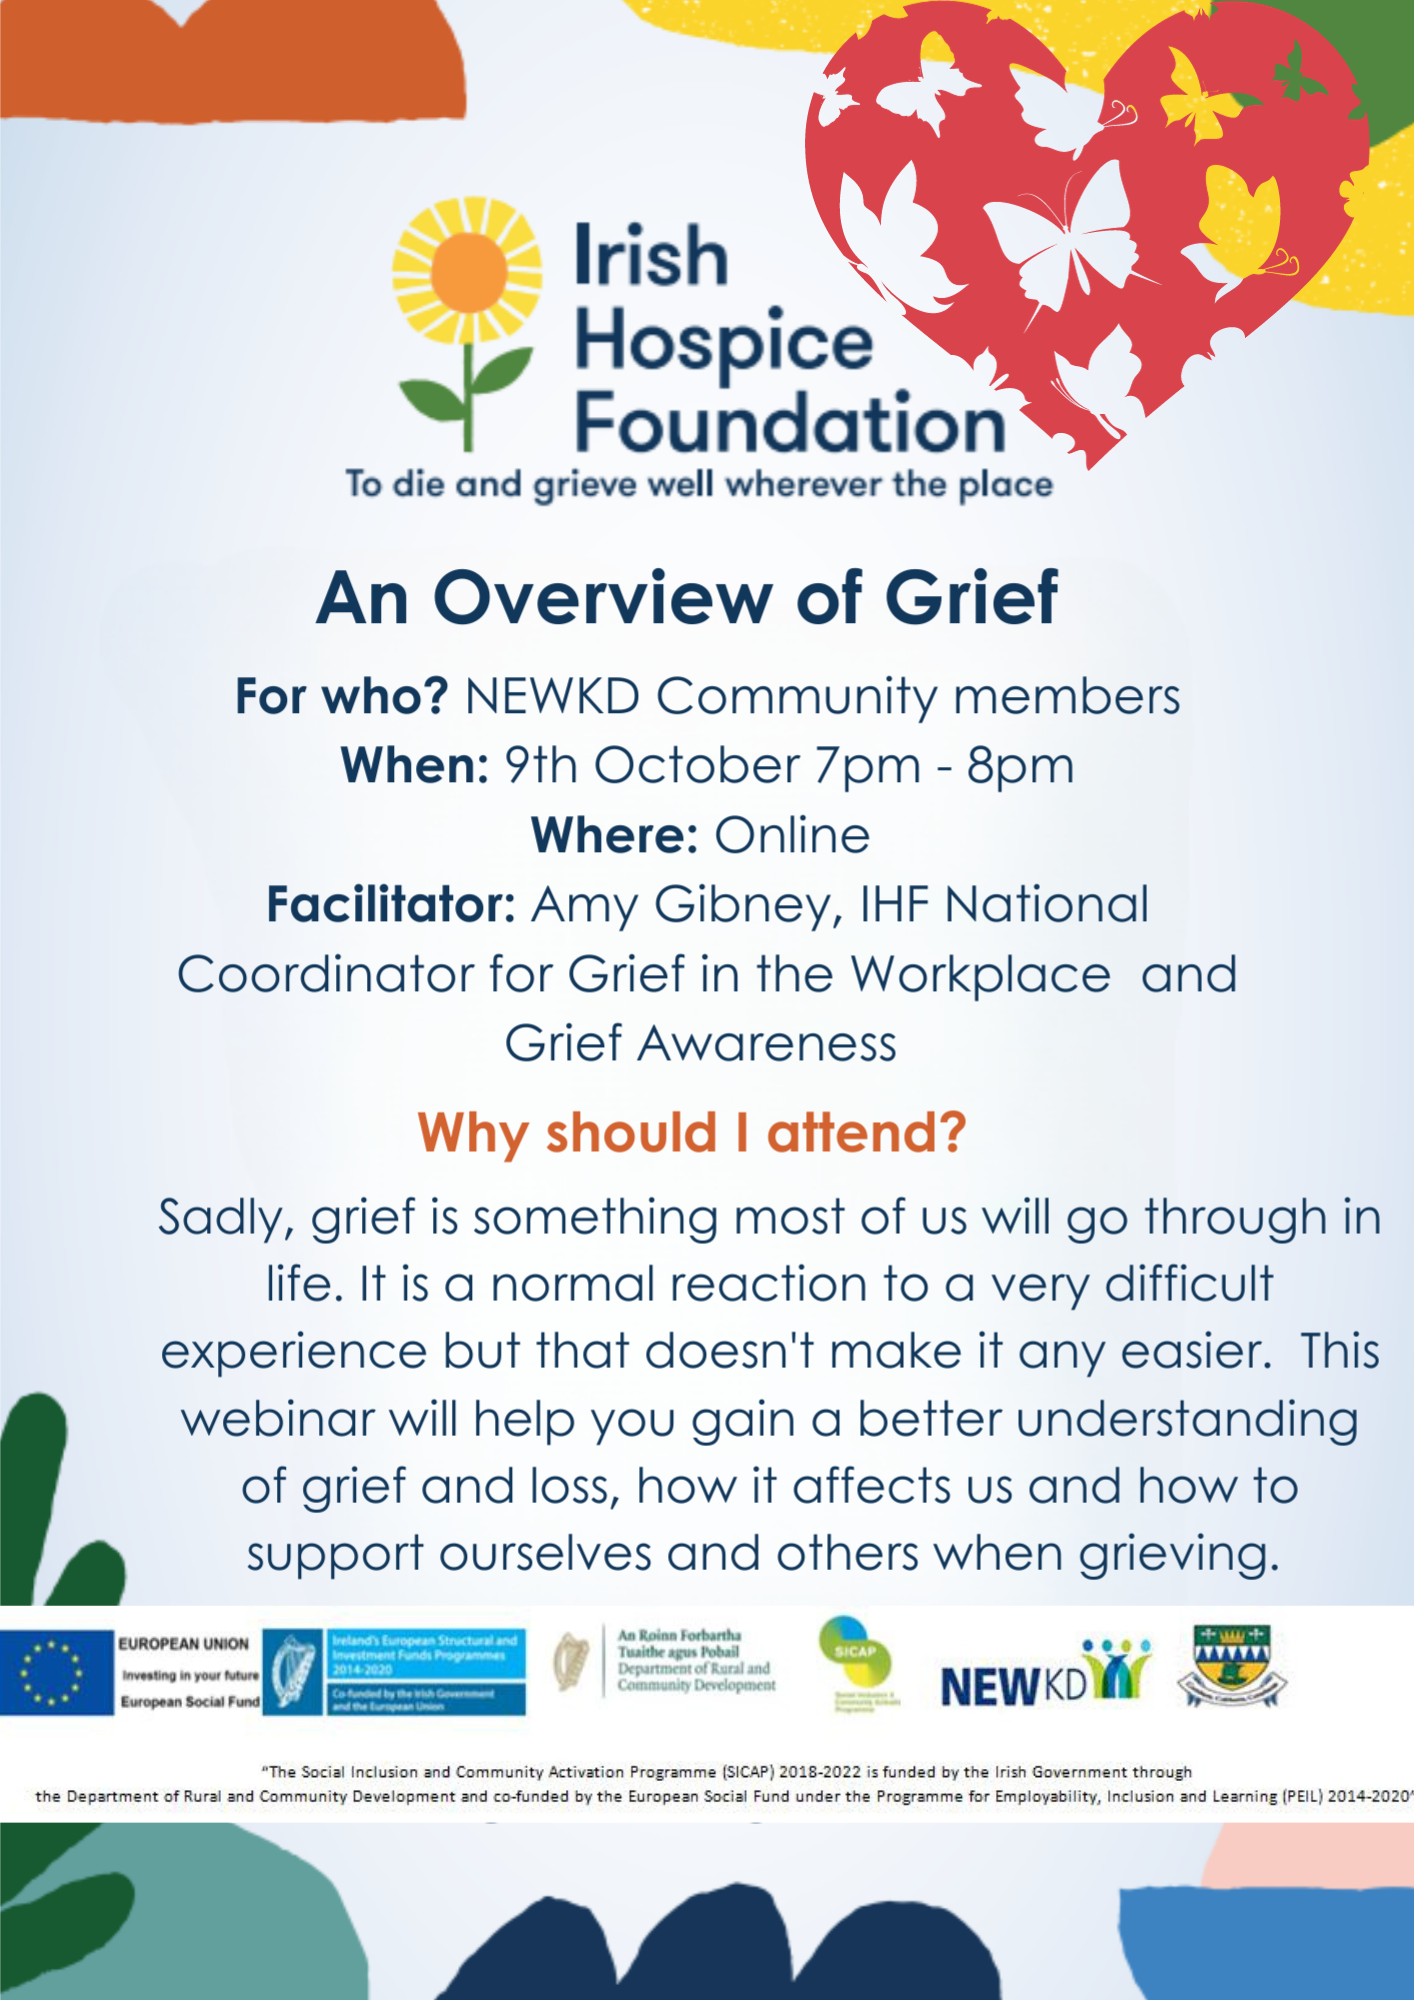 An Overview of Grief event at Kerry Mental Health & Wellbeing Fest 2022